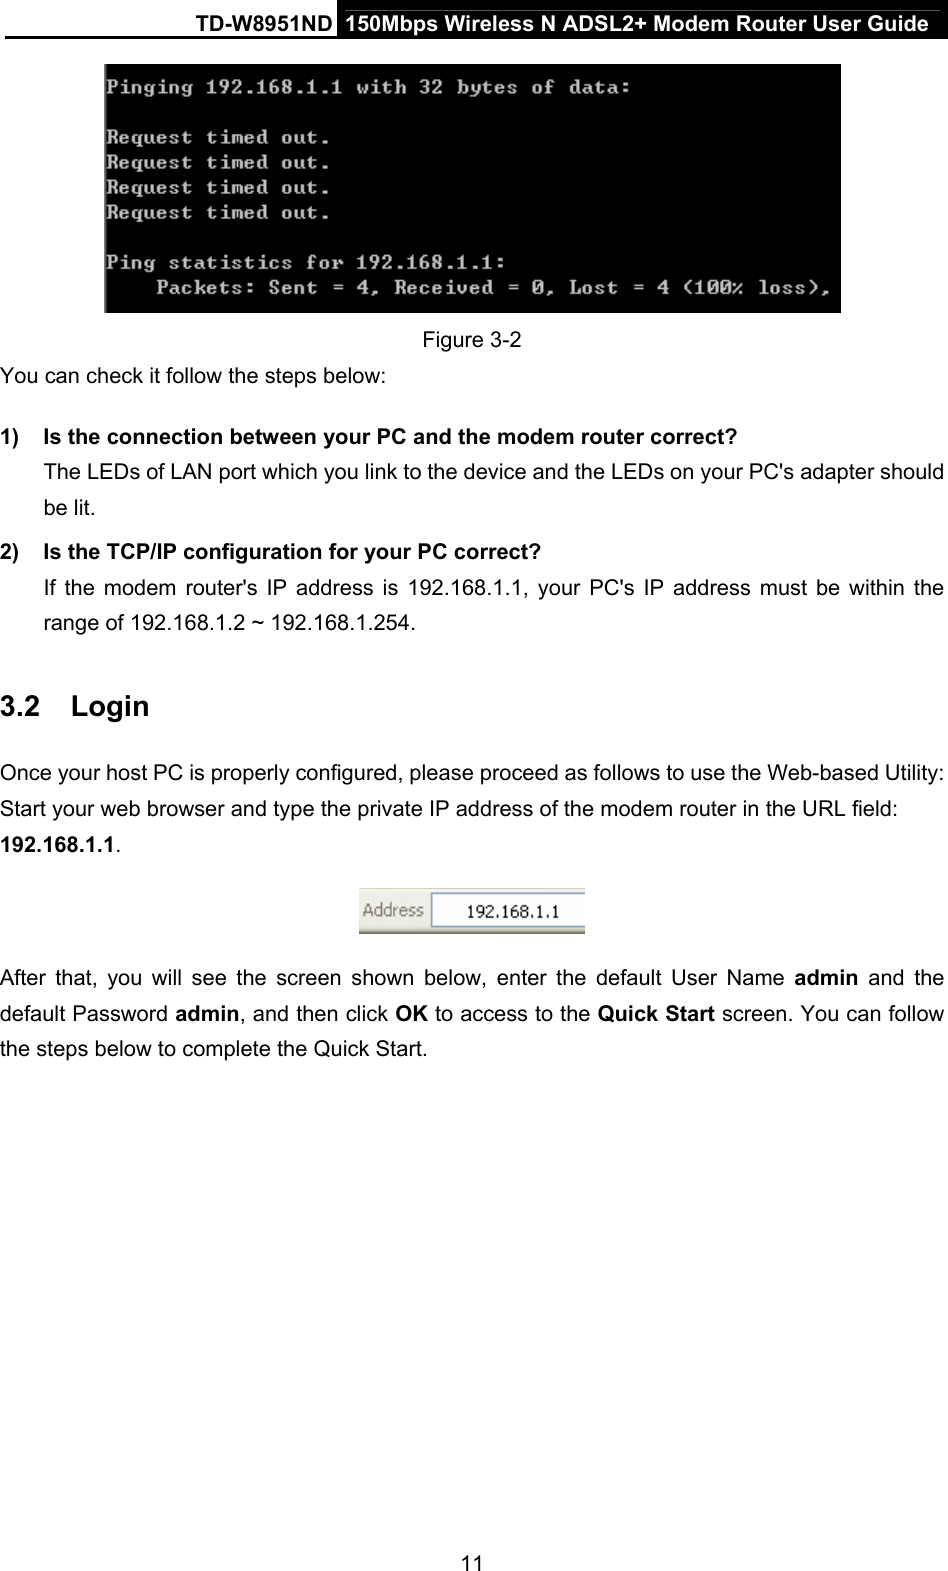 TD-W8951ND  150Mbps Wireless N ADSL2+ Modem Router User Guide  Figure 3-2 You can check it follow the steps below: 1)  Is the connection between your PC and the modem router correct? The LEDs of LAN port which you link to the device and the LEDs on your PC&apos;s adapter should be lit. 2)  Is the TCP/IP configuration for your PC correct? If the modem router&apos;s IP address is 192.168.1.1, your PC&apos;s IP address must be within the range of 192.168.1.2 ~ 192.168.1.254. 3.2  Login Once your host PC is properly configured, please proceed as follows to use the Web-based Utility: Start your web browser and type the private IP address of the modem router in the URL field: 192.168.1.1.   After that, you will see the screen shown below, enter the default User Name admin and the default Password admin, and then click OK to access to the Quick Start screen. You can follow the steps below to complete the Quick Start. 11 